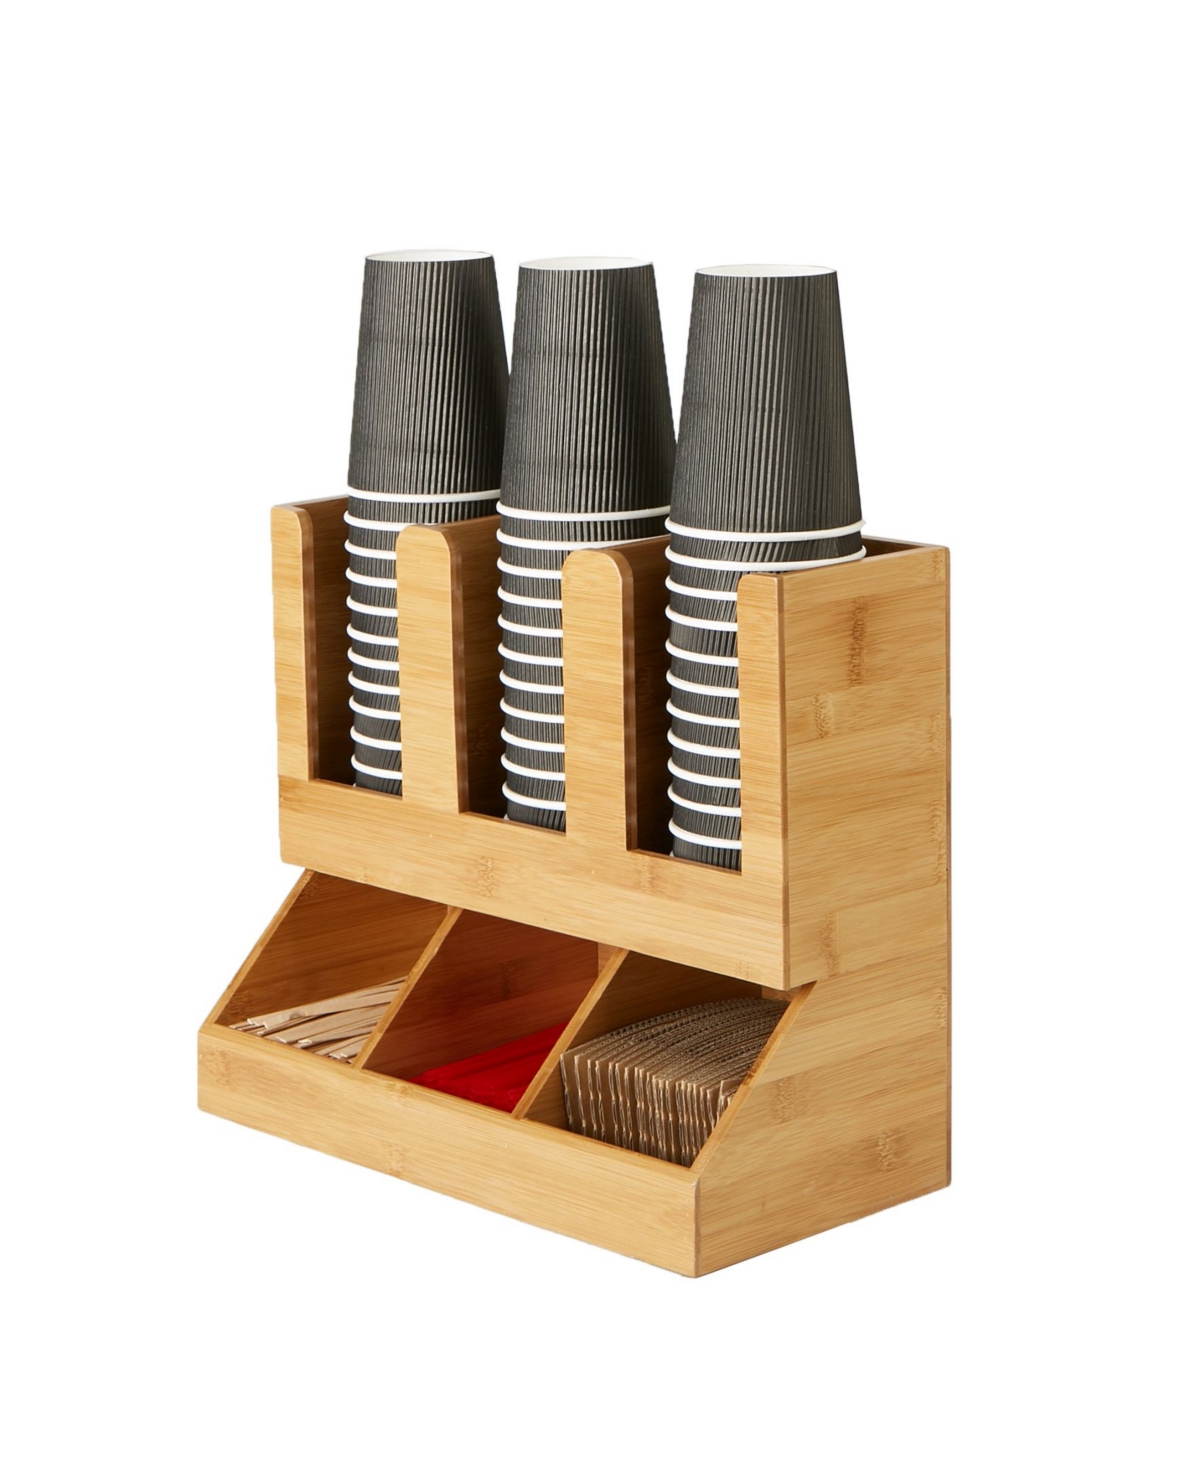 6 Compartment Upright Coffee Condiment and Cup Storage Organizer - Brown